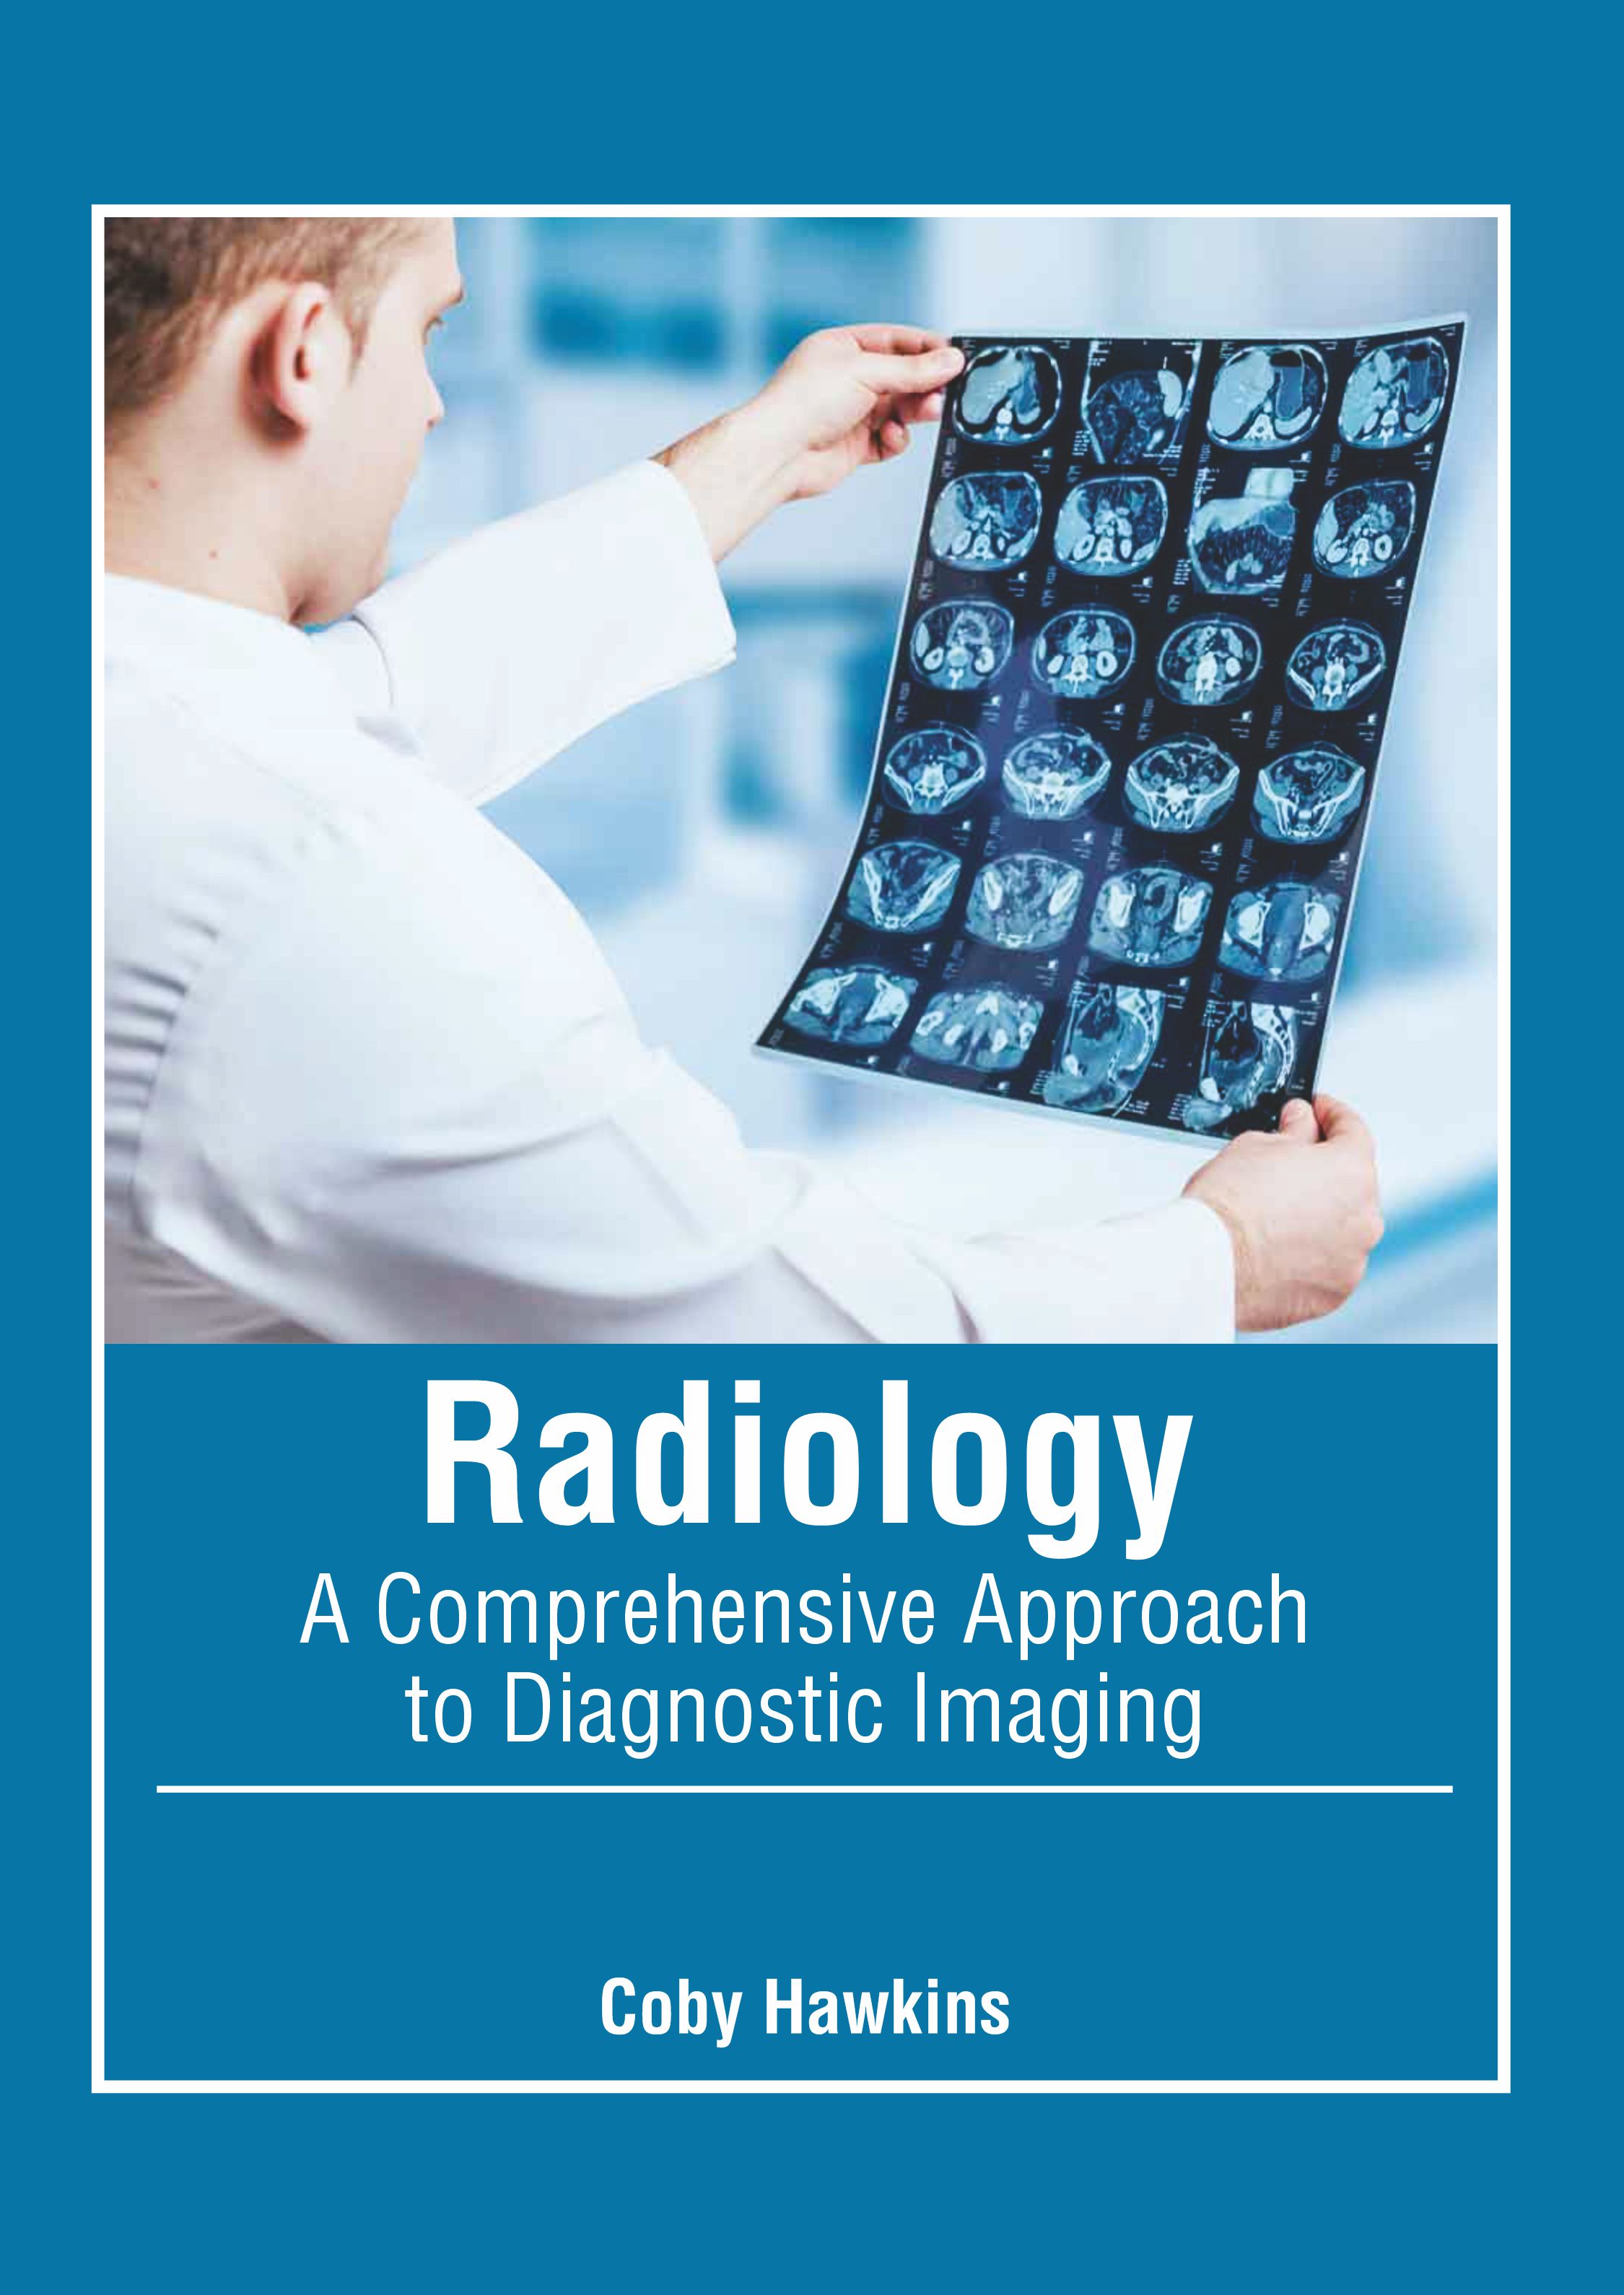 
exclusive-publishers/american-medical-publishers/radiology-a-comprehensive-approach-to-diagnostic-imaging-9781639270804